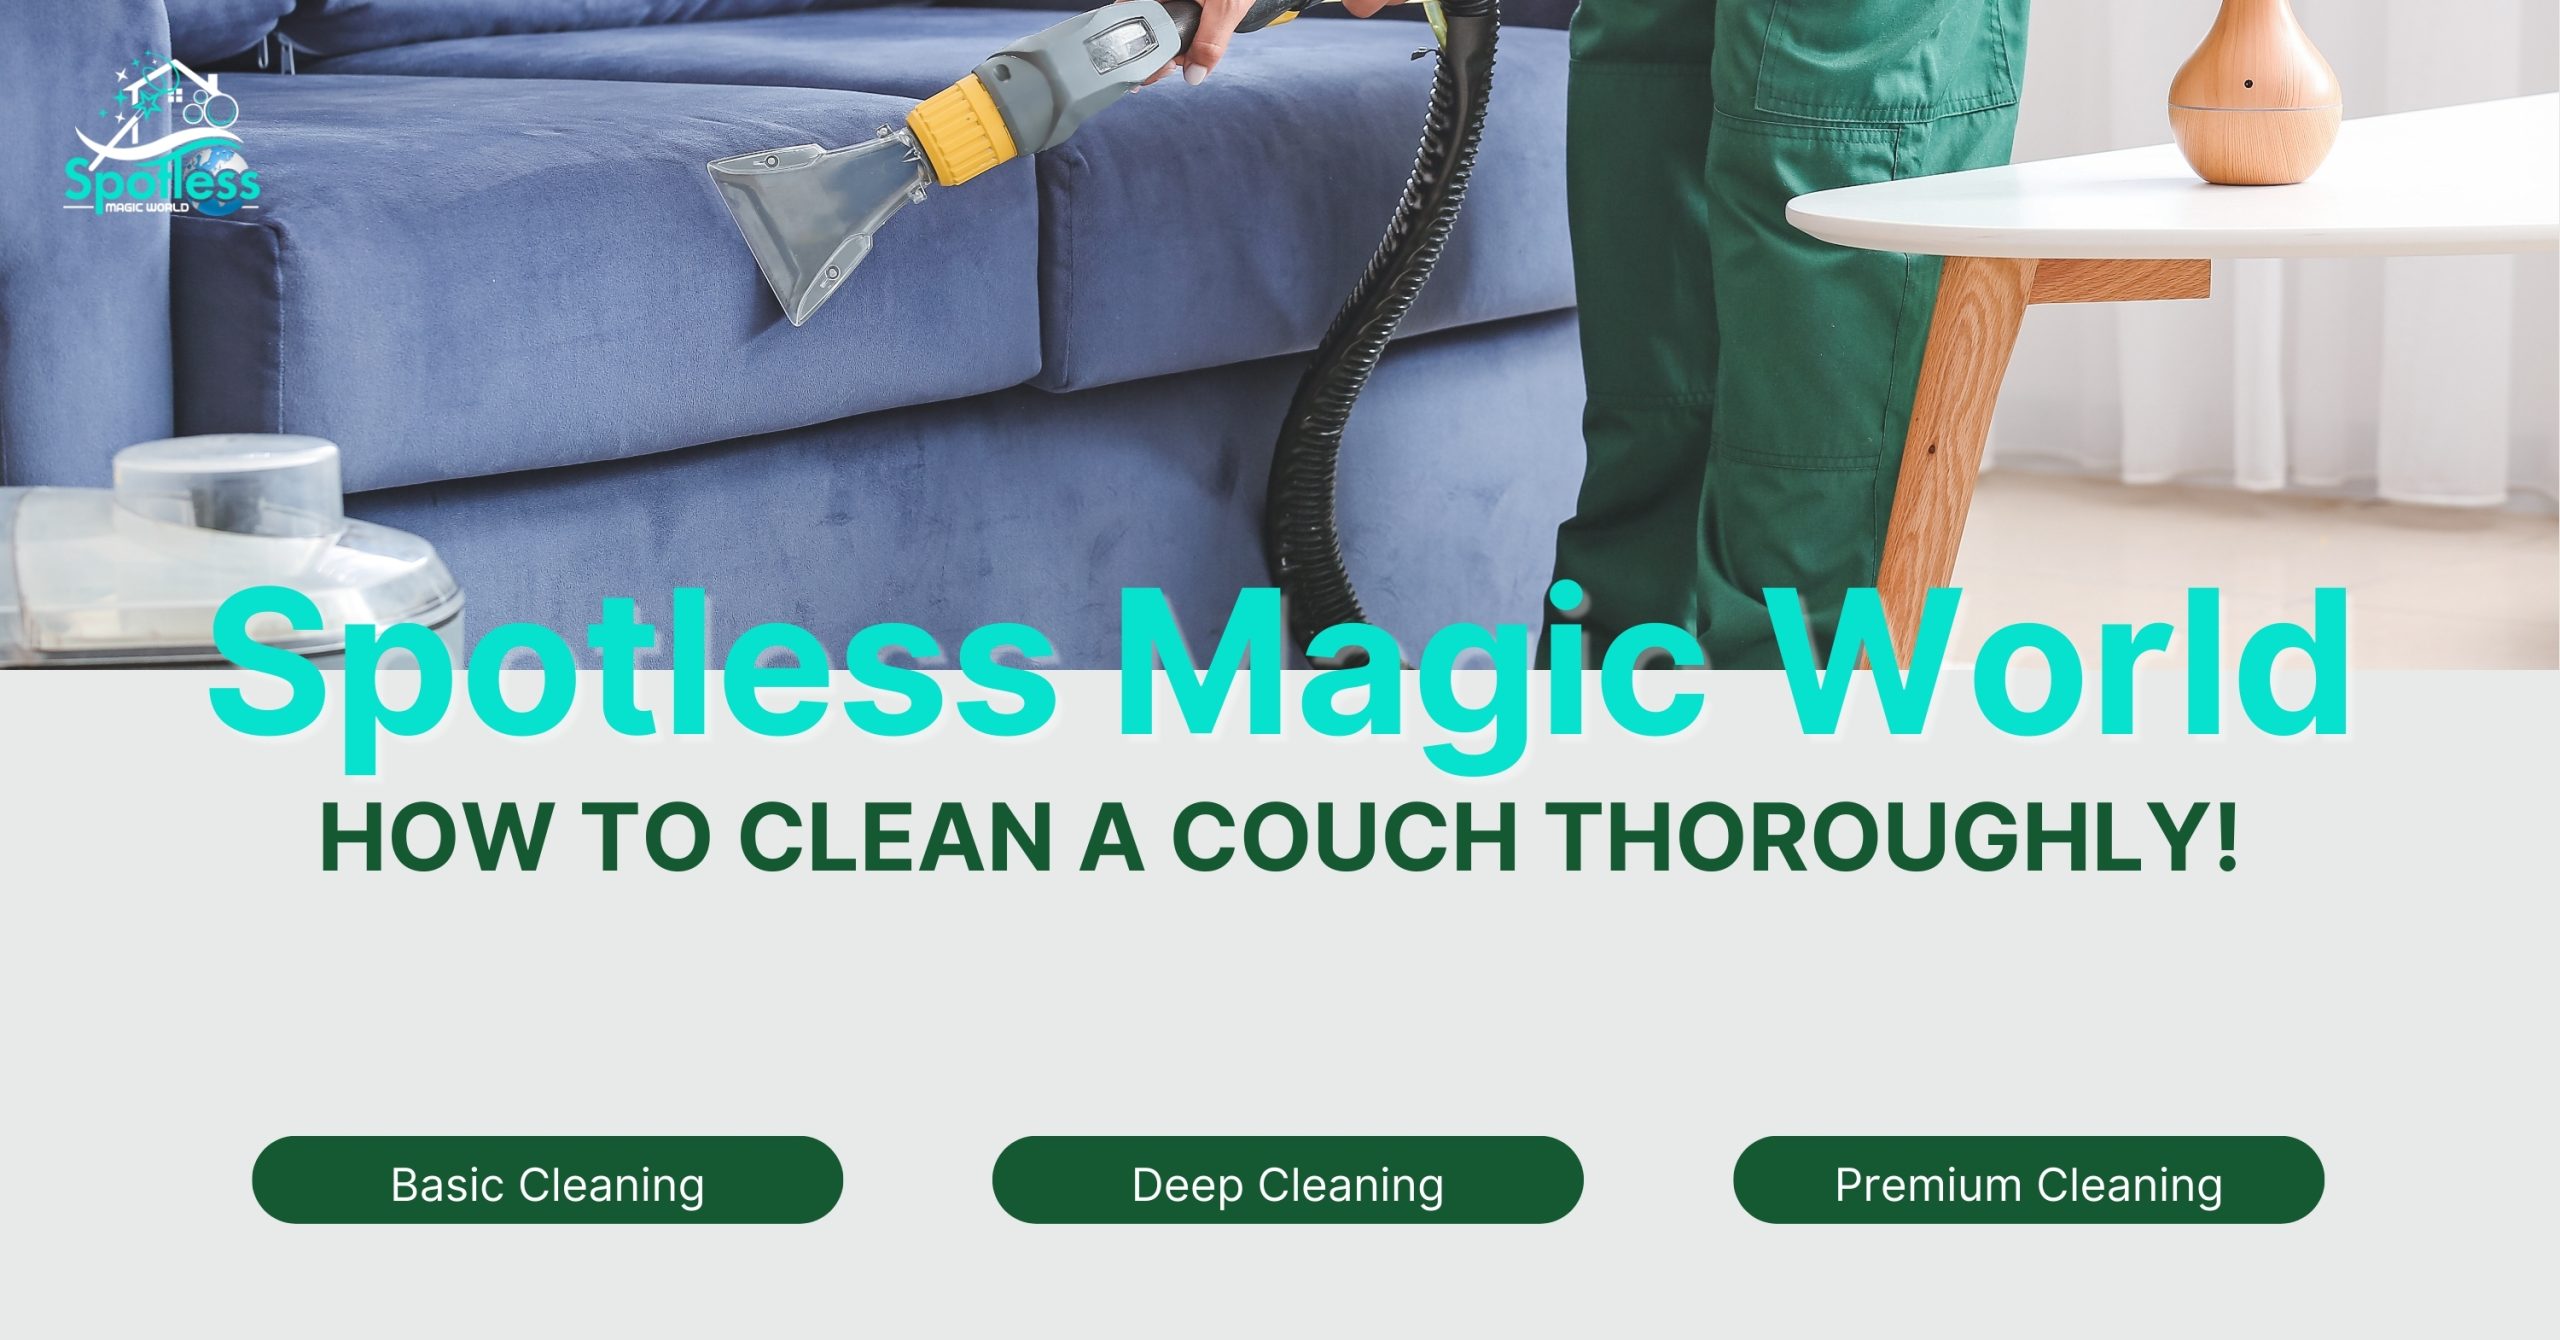 How to deep clean a couch